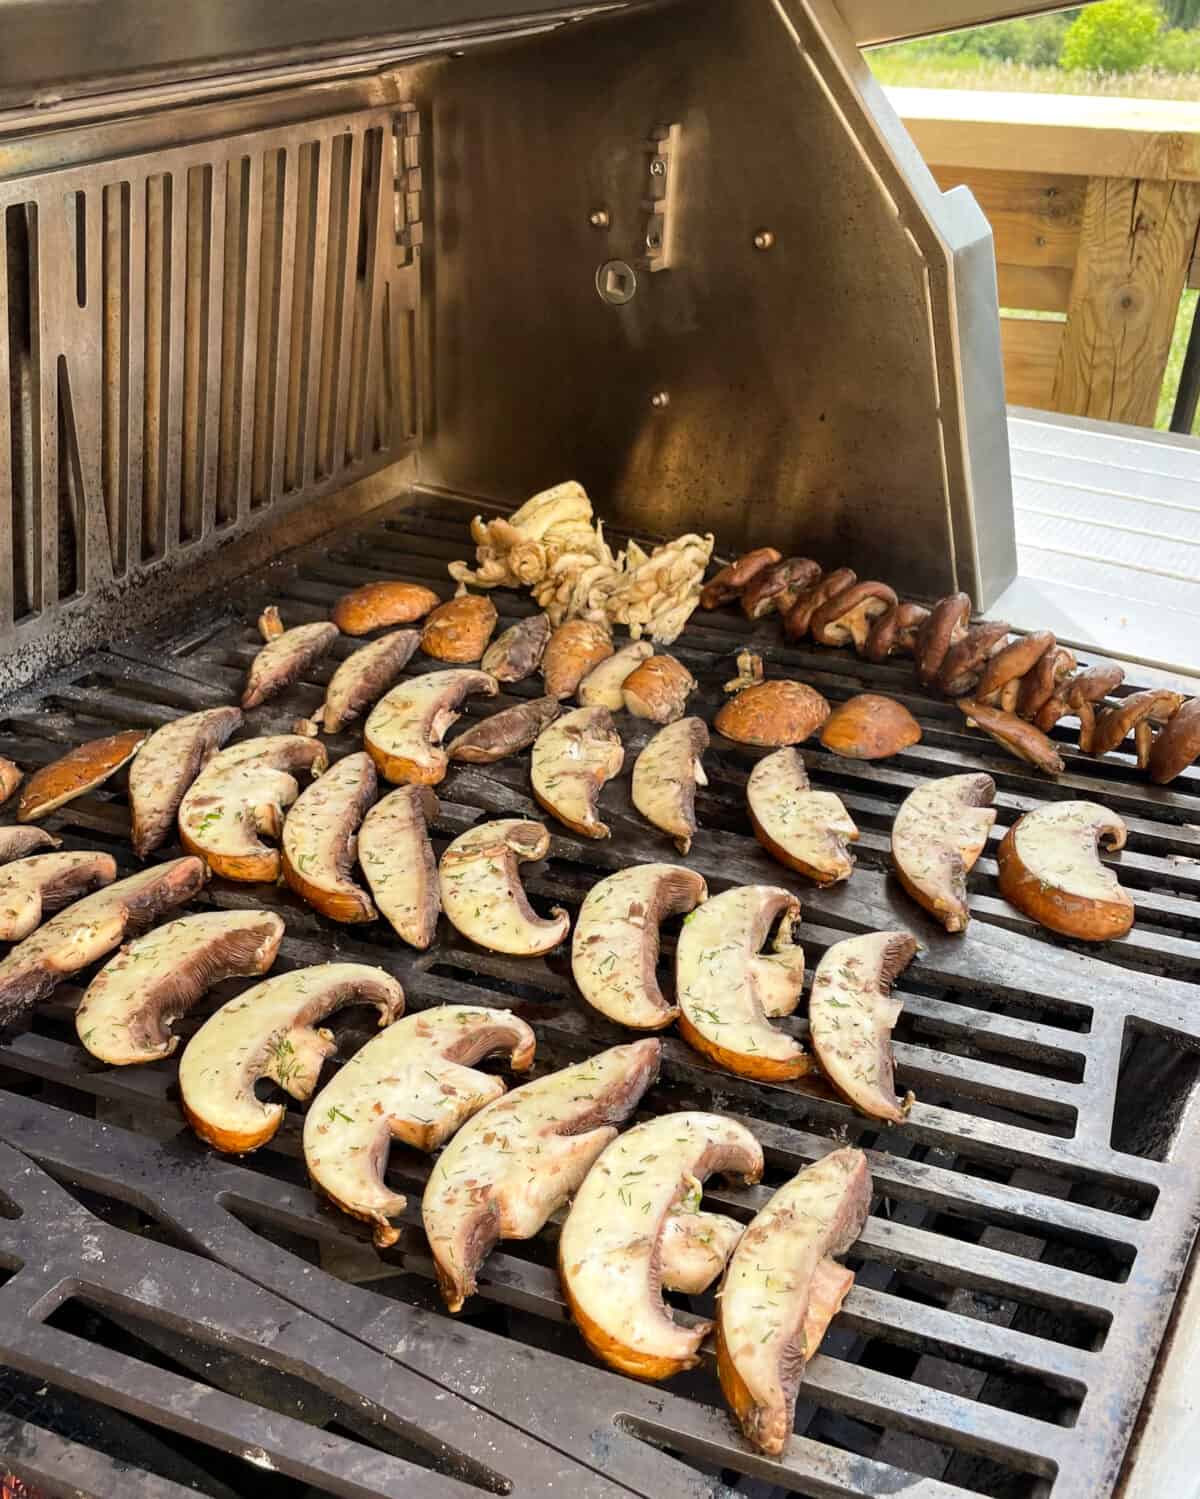 Three types of mushrooms being grilled in rows.